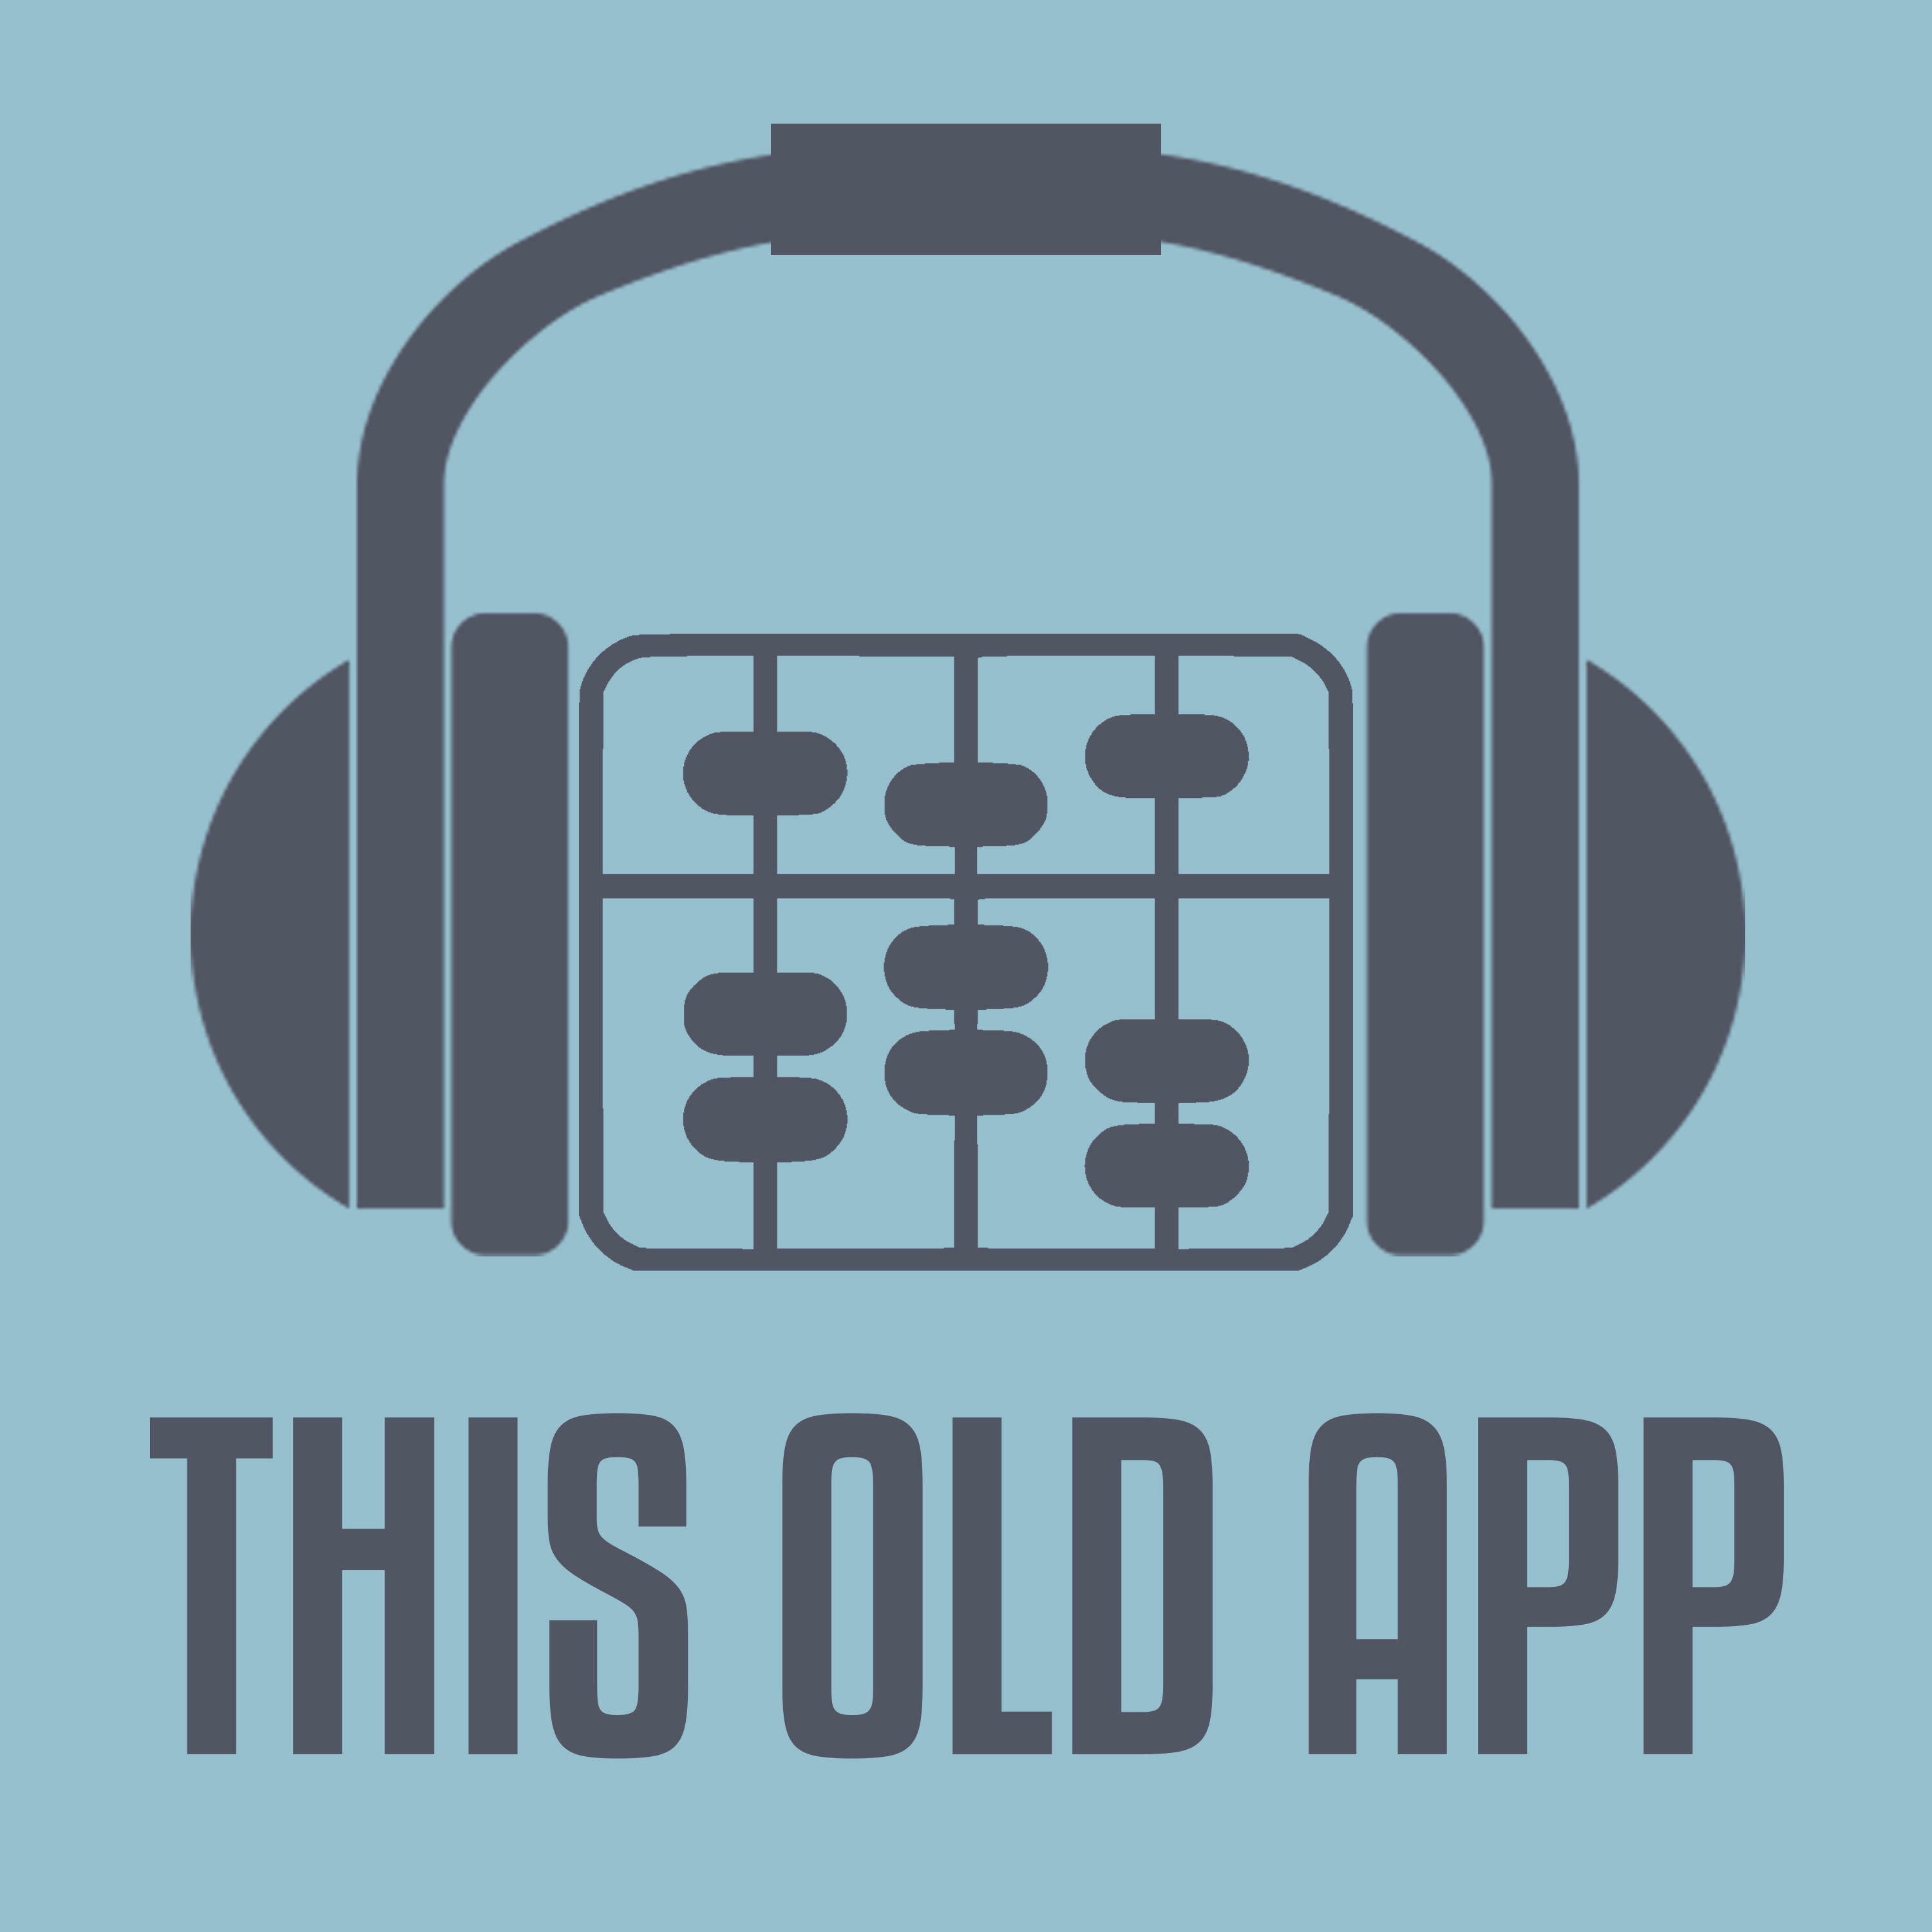 Voice interfaces. Old app. Old apps. Podcast app UI. Big idea.